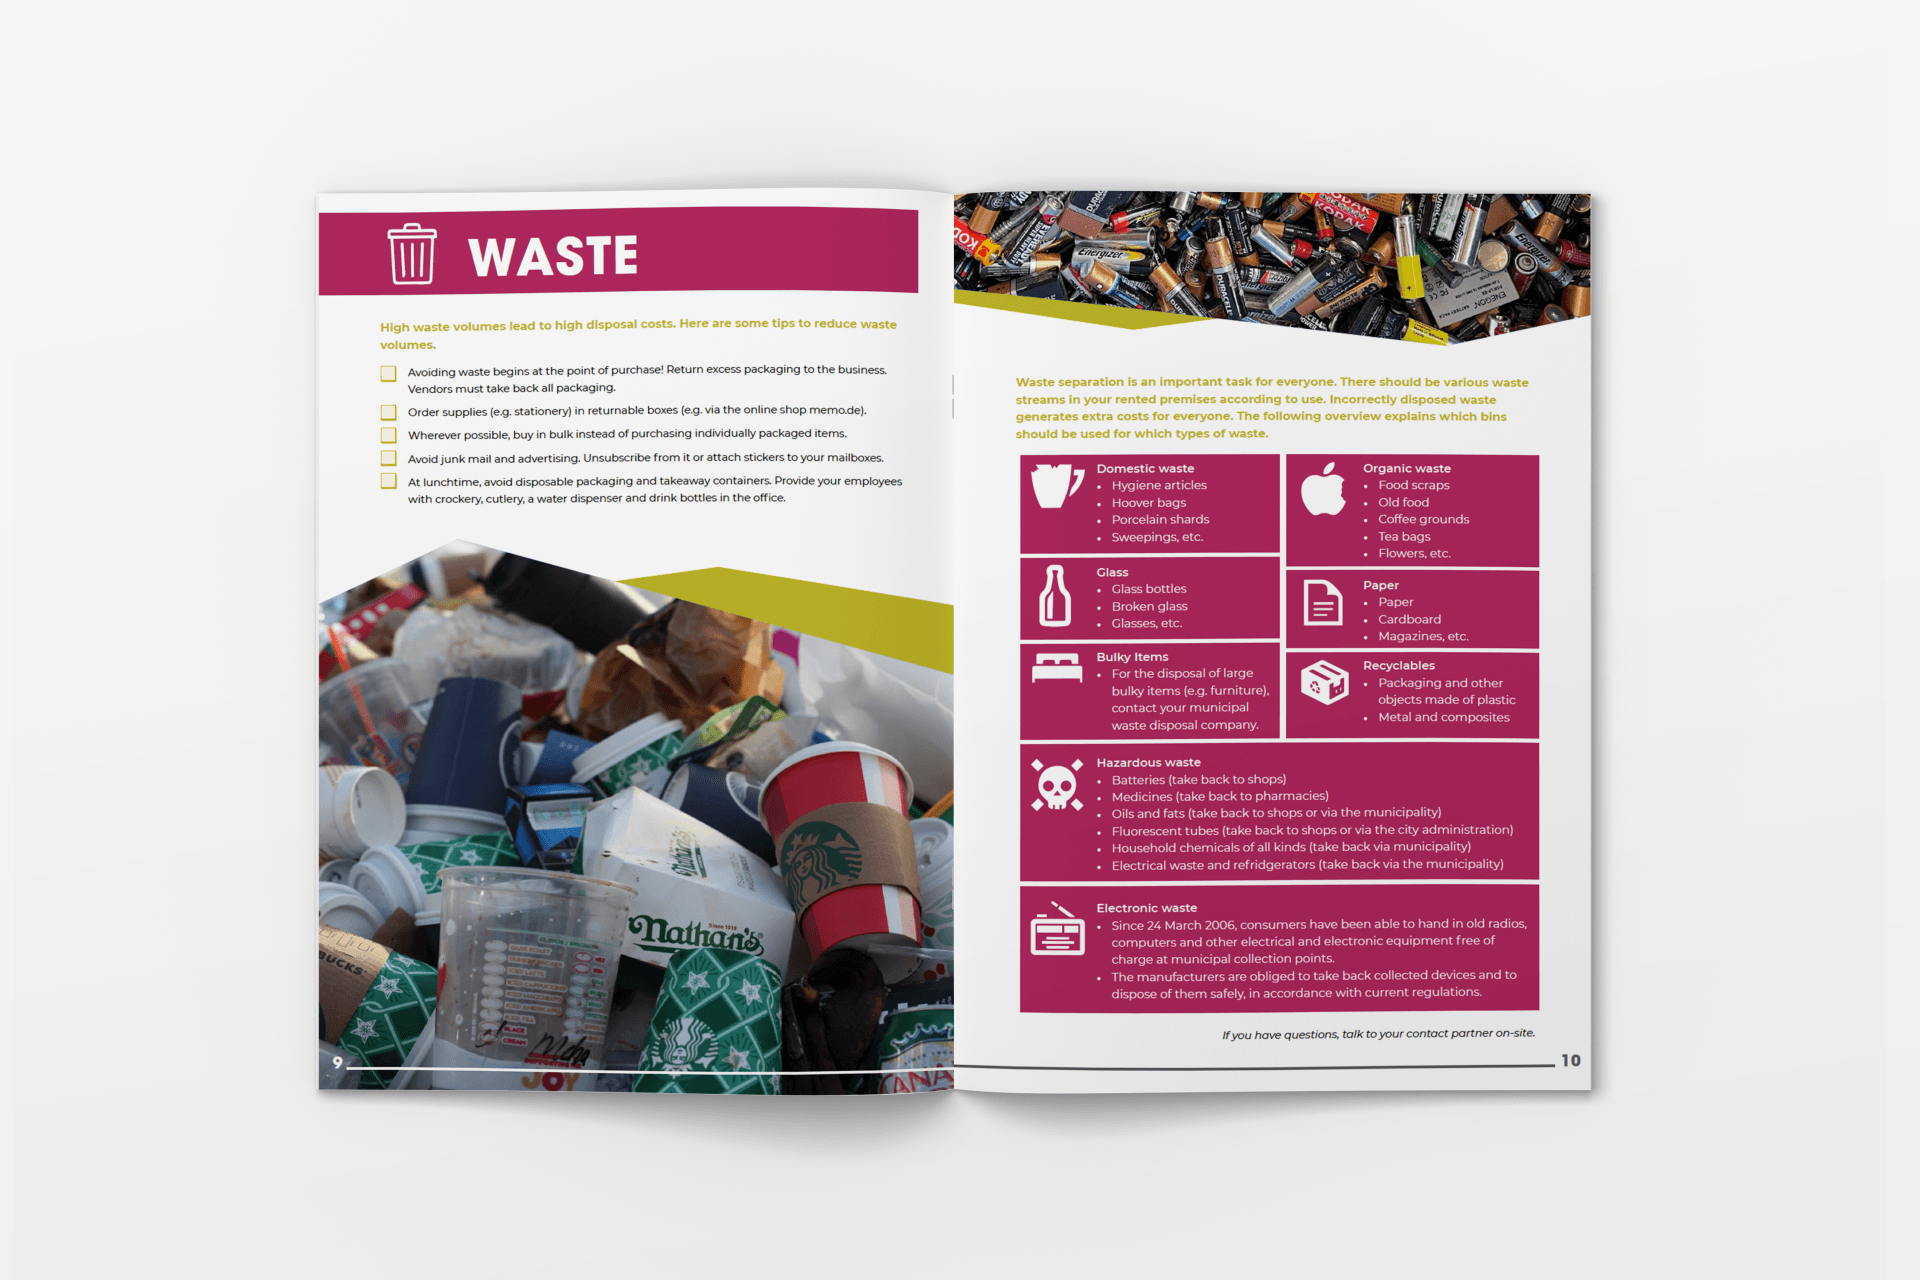 A book is open on a two page spread on household waste.